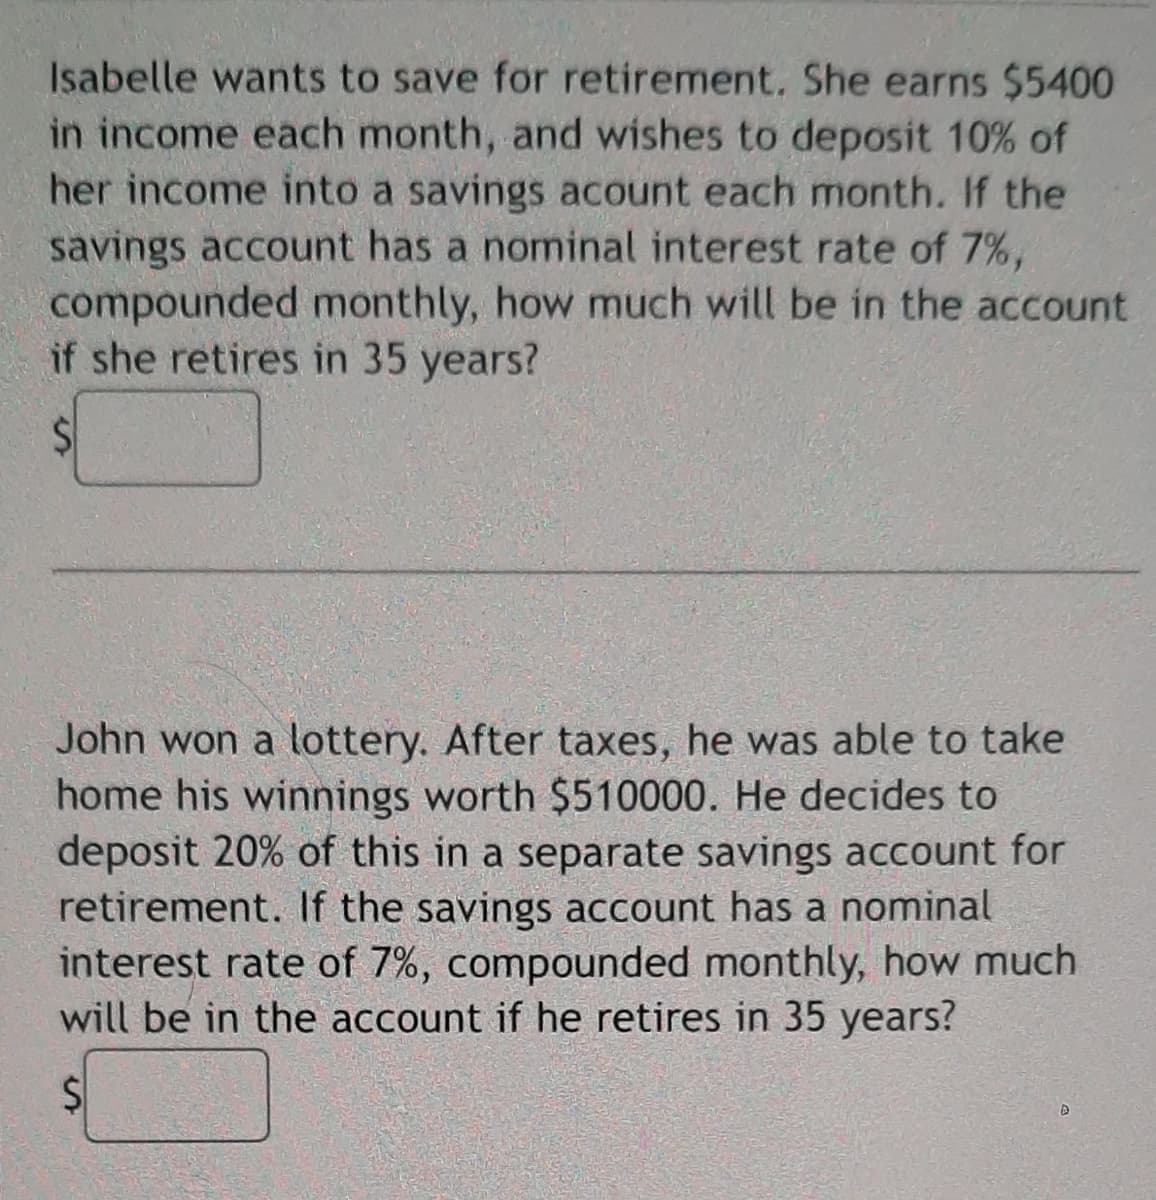 Isabelle wants to save for retirement. She earns $5400
in income each month, and wishes to deposit 10% of
her income into a savings acount each month. If the
savings account has a nominal interest rate of 7%,
compounded monthly, how much will be in the account
if she retires in 35 years?
John won a lottery. After taxes, he was able to take
home his winnings worth $510000. He decides to
deposit 20% of this in a separate savings account for
retirement. If the savings account has a nominal
interest rate of 7%, compounded monthly, how much
will be in the account if he retires in 35 years?
